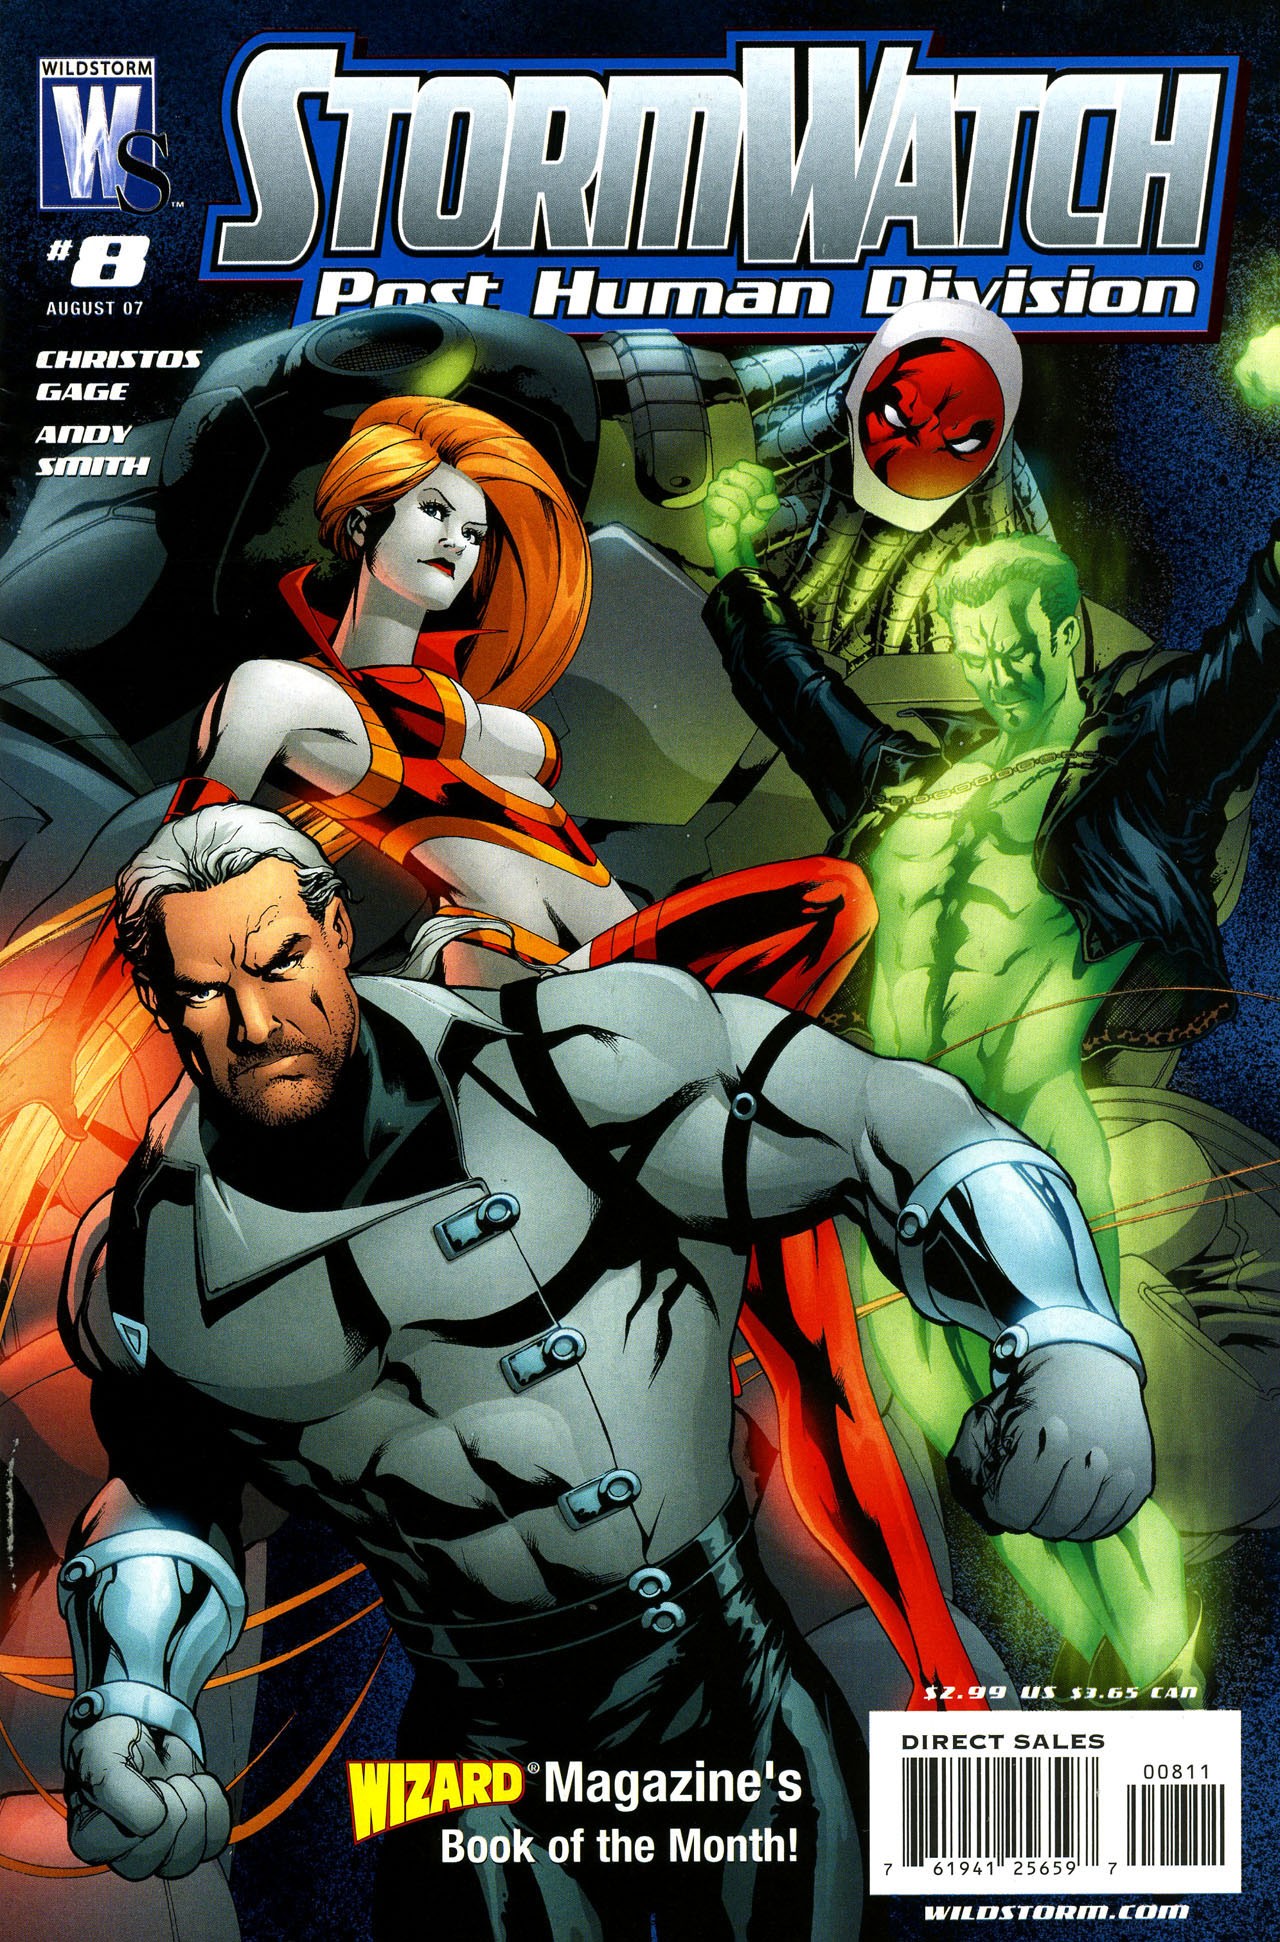 Stormwatch: Post Human Division Vol. 1 #8